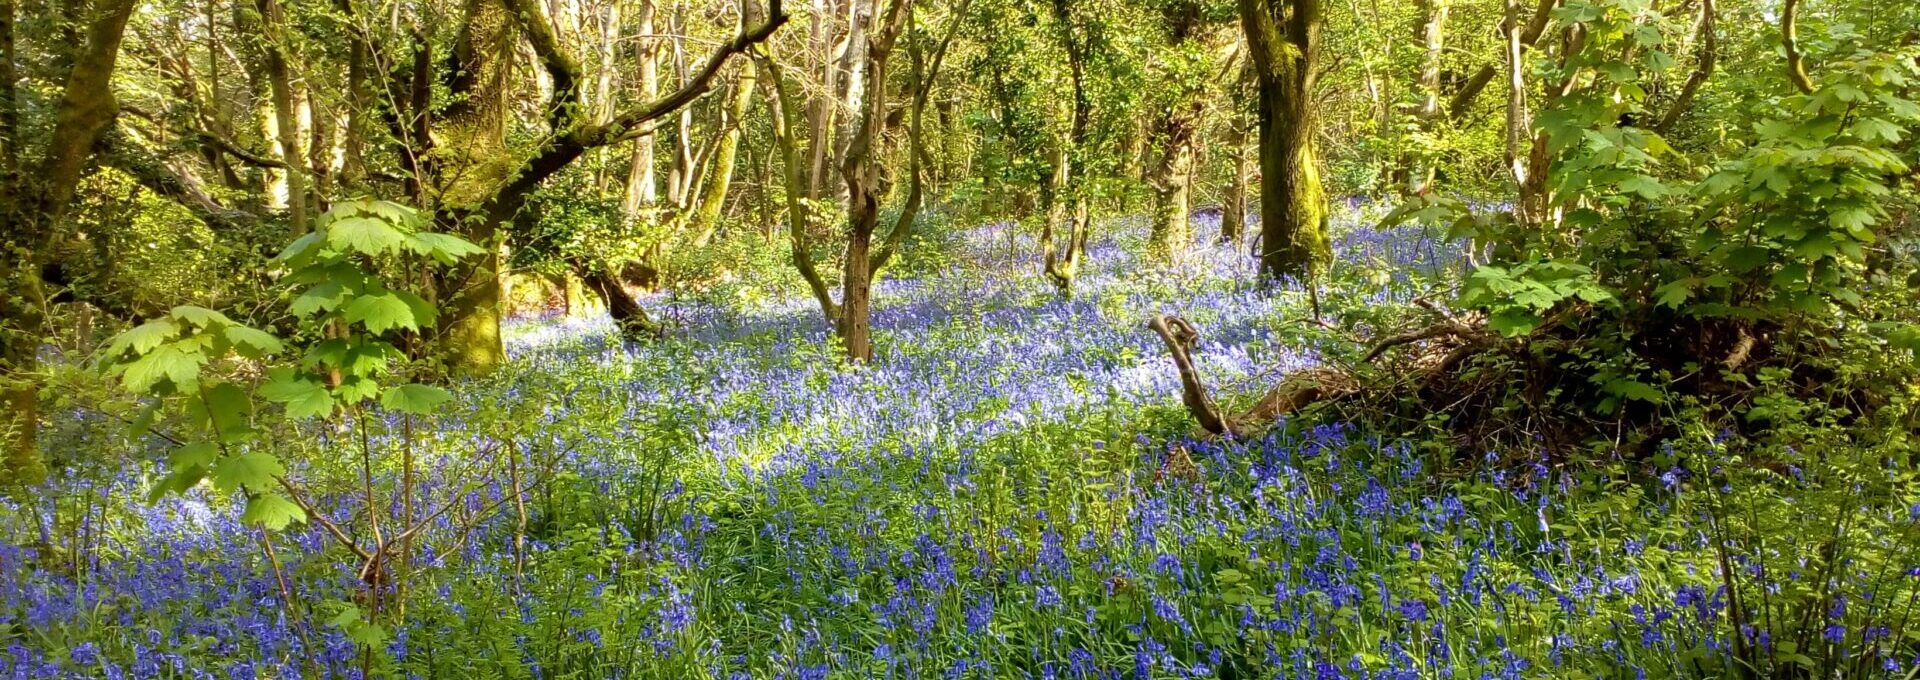 Bluebells by Ed Dolphin